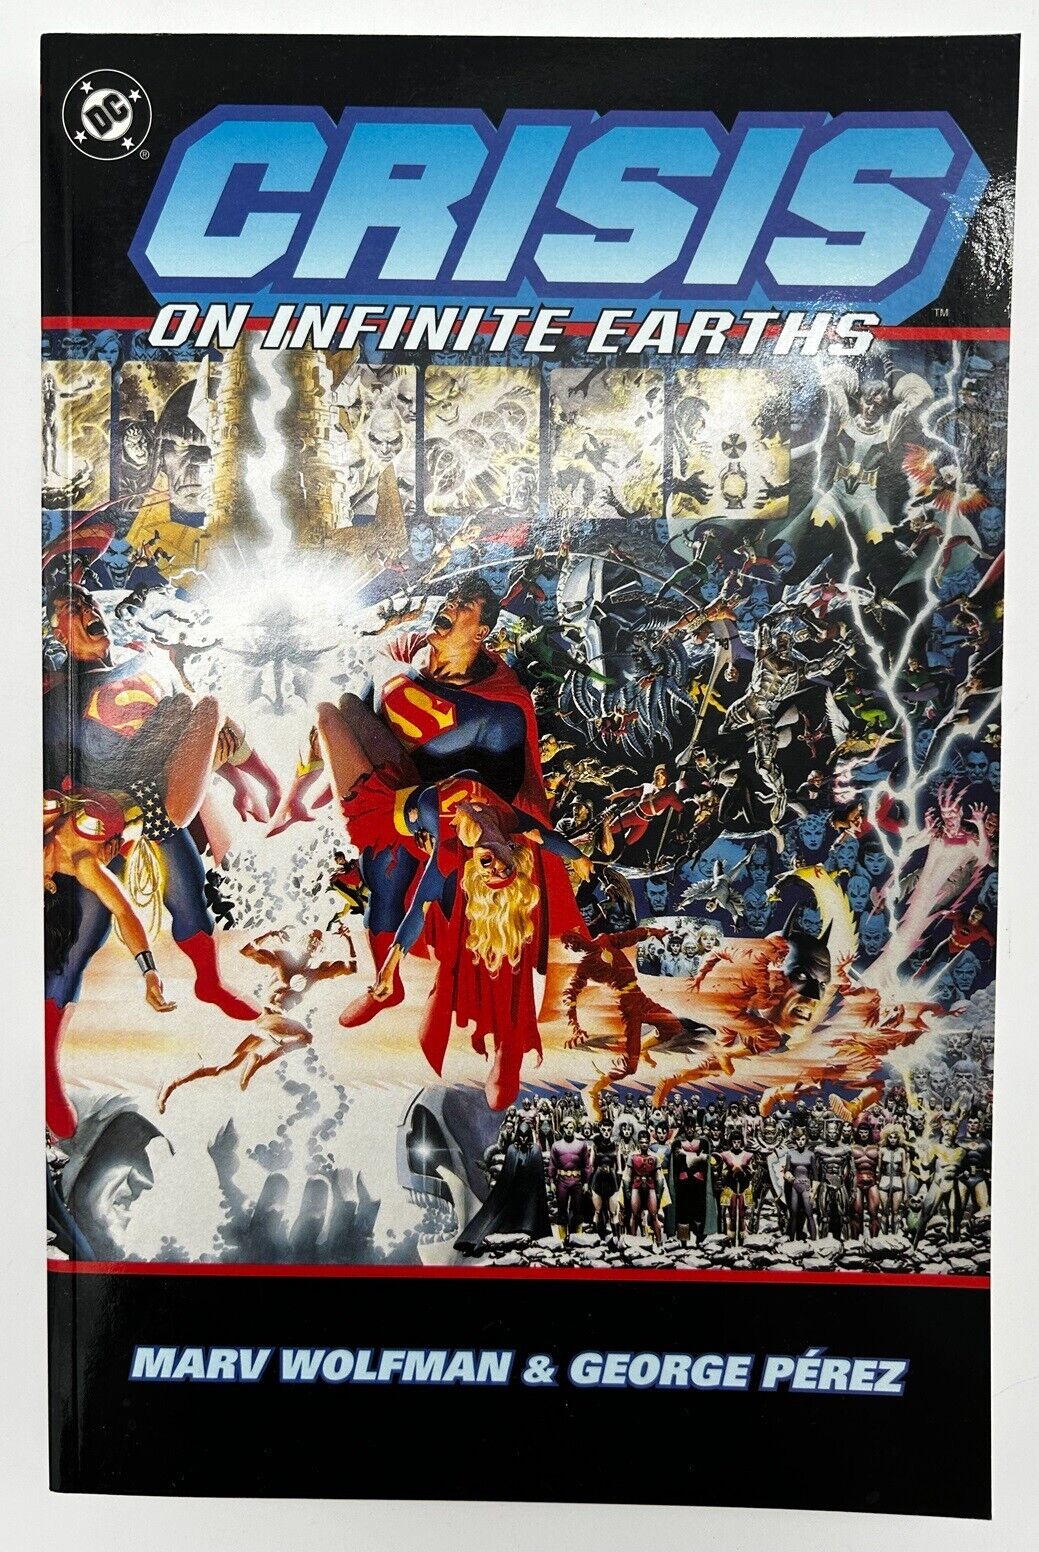 DC Trade Paperback - Crisis On Infinite Earths - New Unread